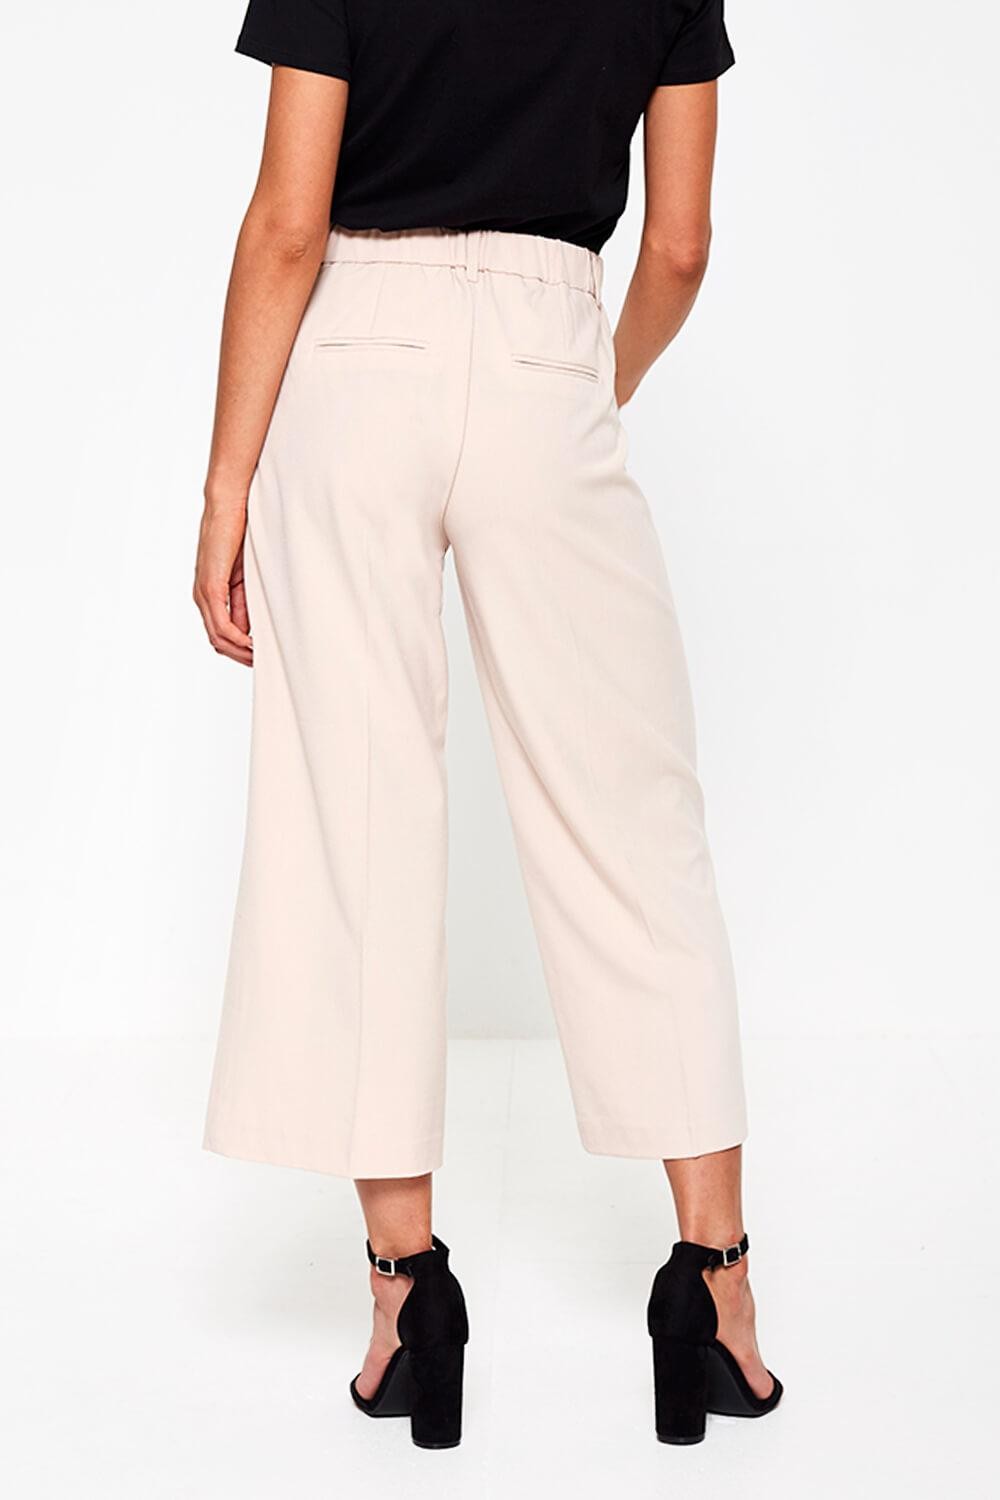 B.Young Danta Wide Leg Cropped Trousers in Beige | iCLOTHING